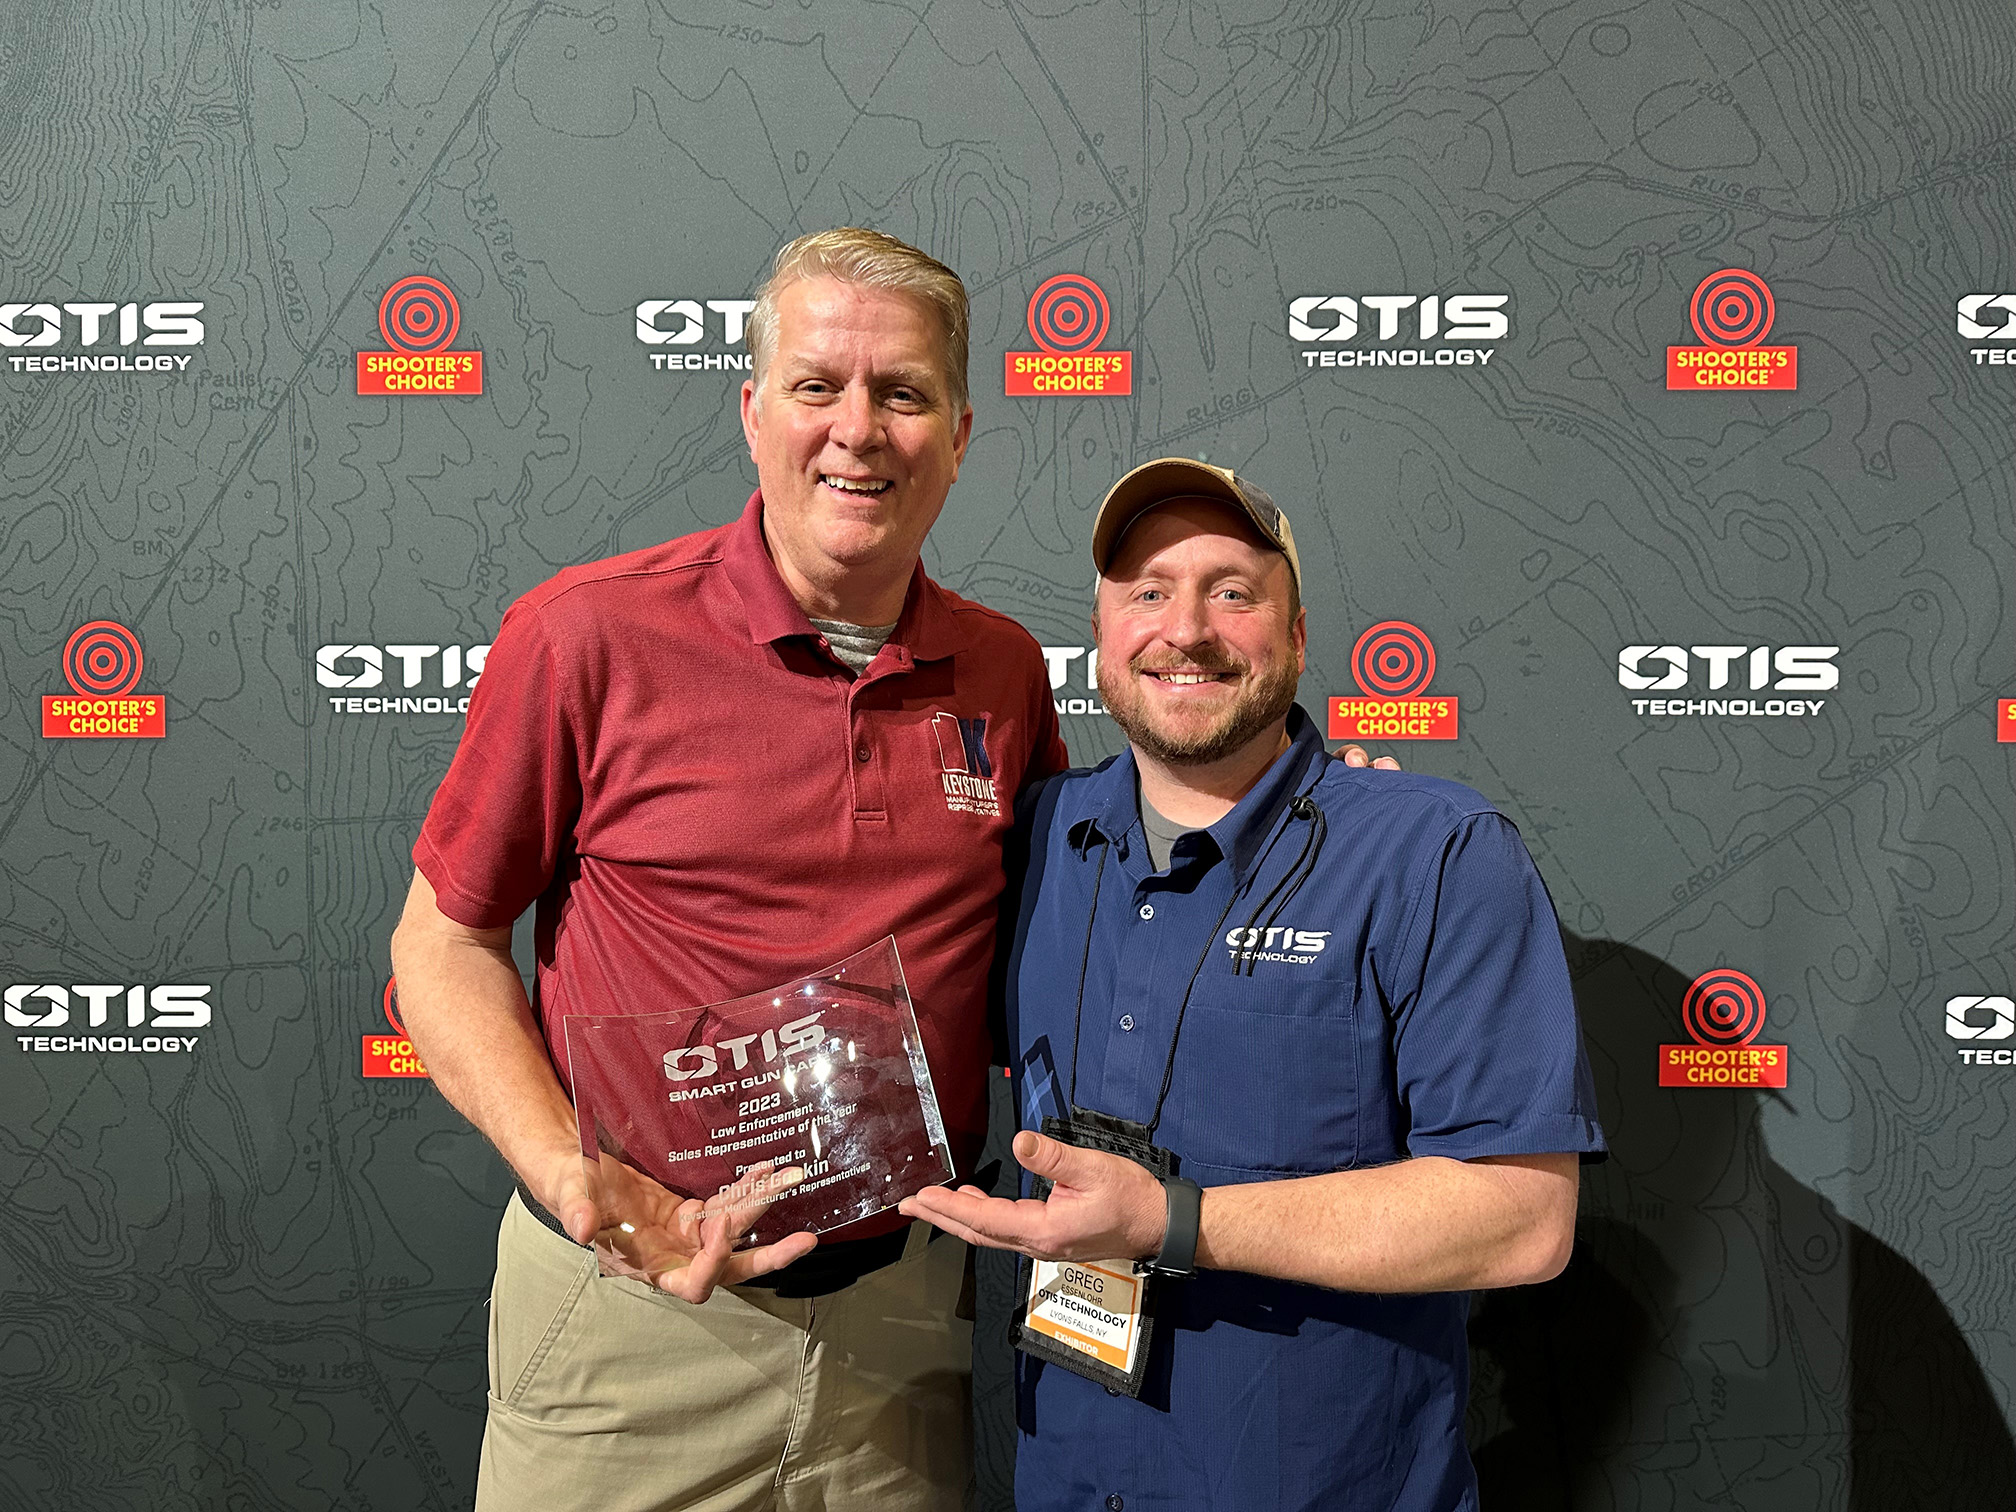 Chris Gaskin (Keystone Manufacturer's Representatives) receiving Law Enforcement Sales Representative of the Year Award from Greg Essenlohr (Otis Technology, Law Enforcement and Government Sales Manager)